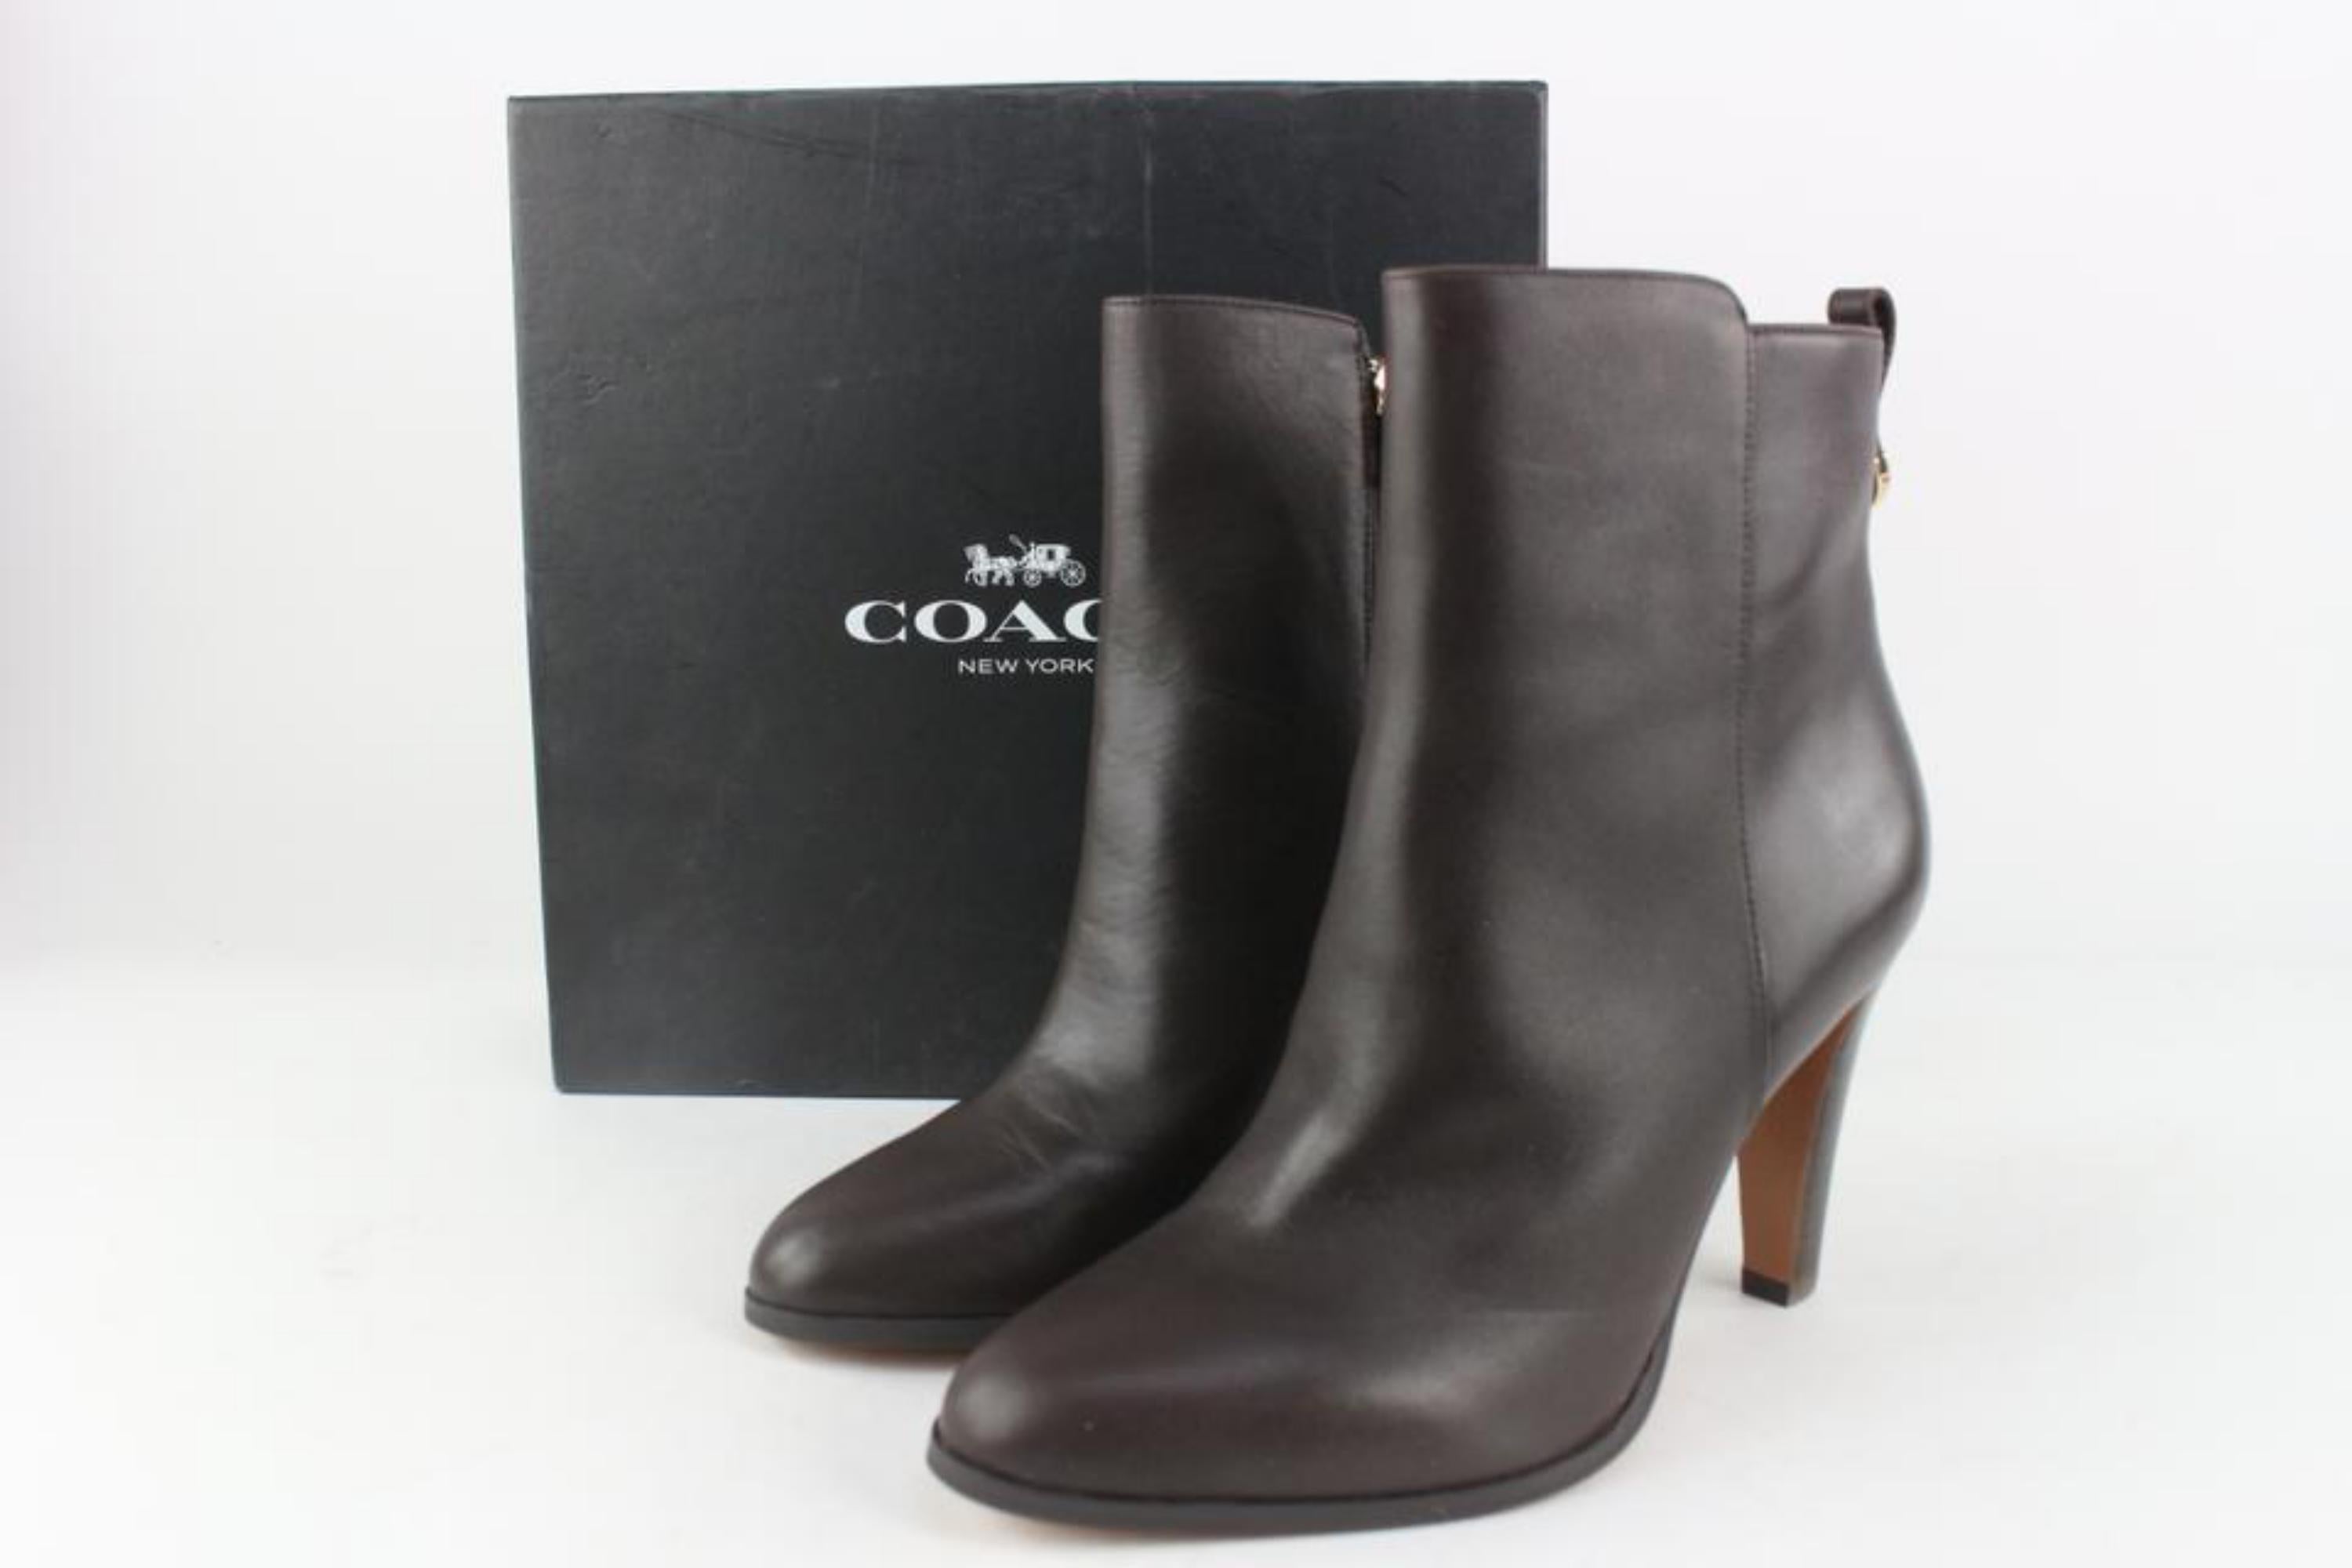 Coach Womens 9.5 Brown Soft Calf Jemma Chestnut Ankle Bootie Booties 3CO1113
Date Code/Serial Number: 7200084/F16
Made In: China
Measurements: Length: 9 